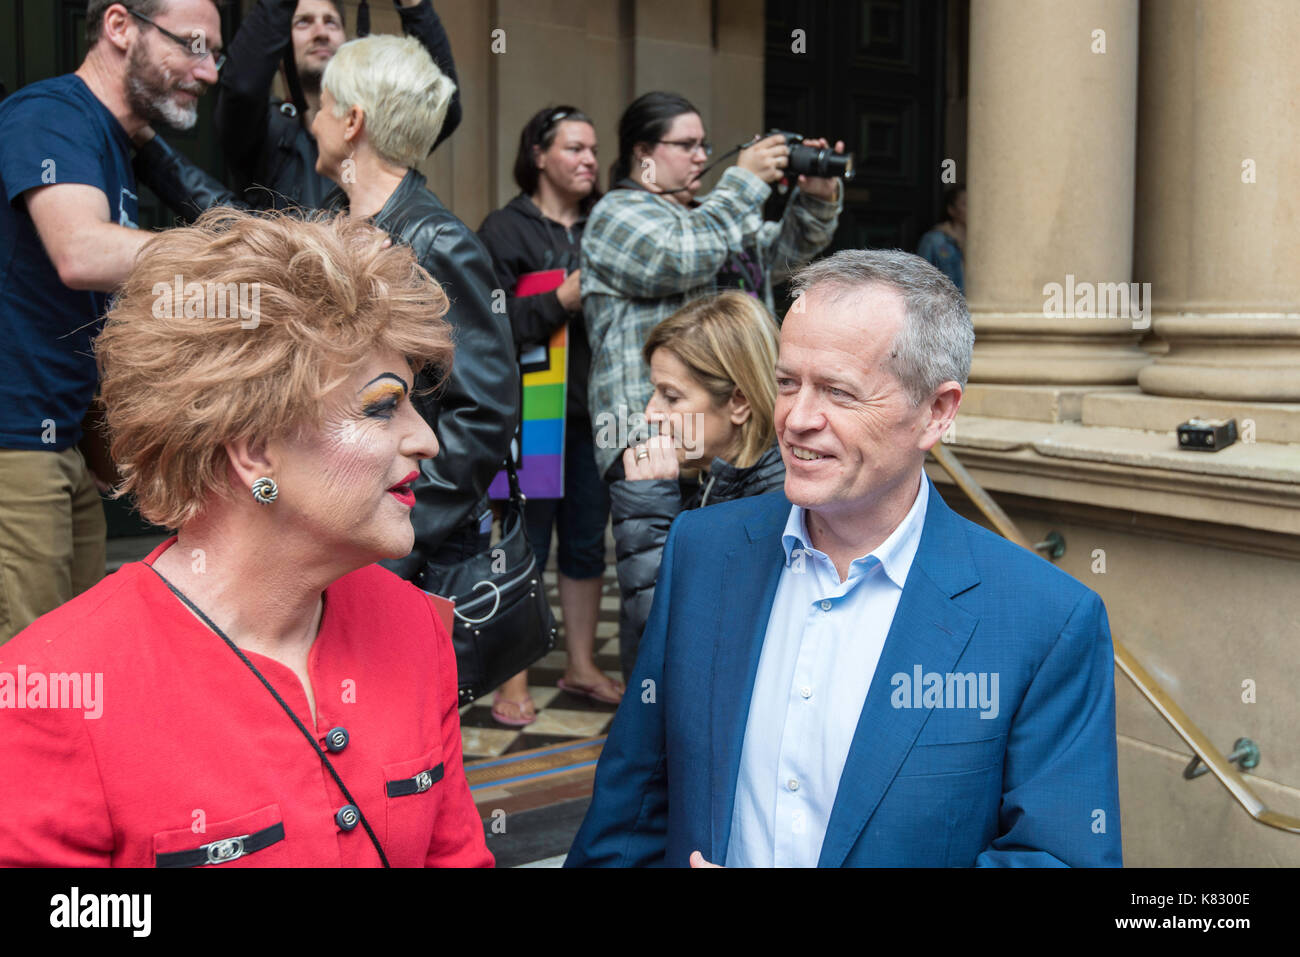 Federal Opposition Leader Mr Bill Shorten speaks to actor comedian Pauline Pantsdown at a marriage equality rally in Sydney in September 2017 Stock Photo